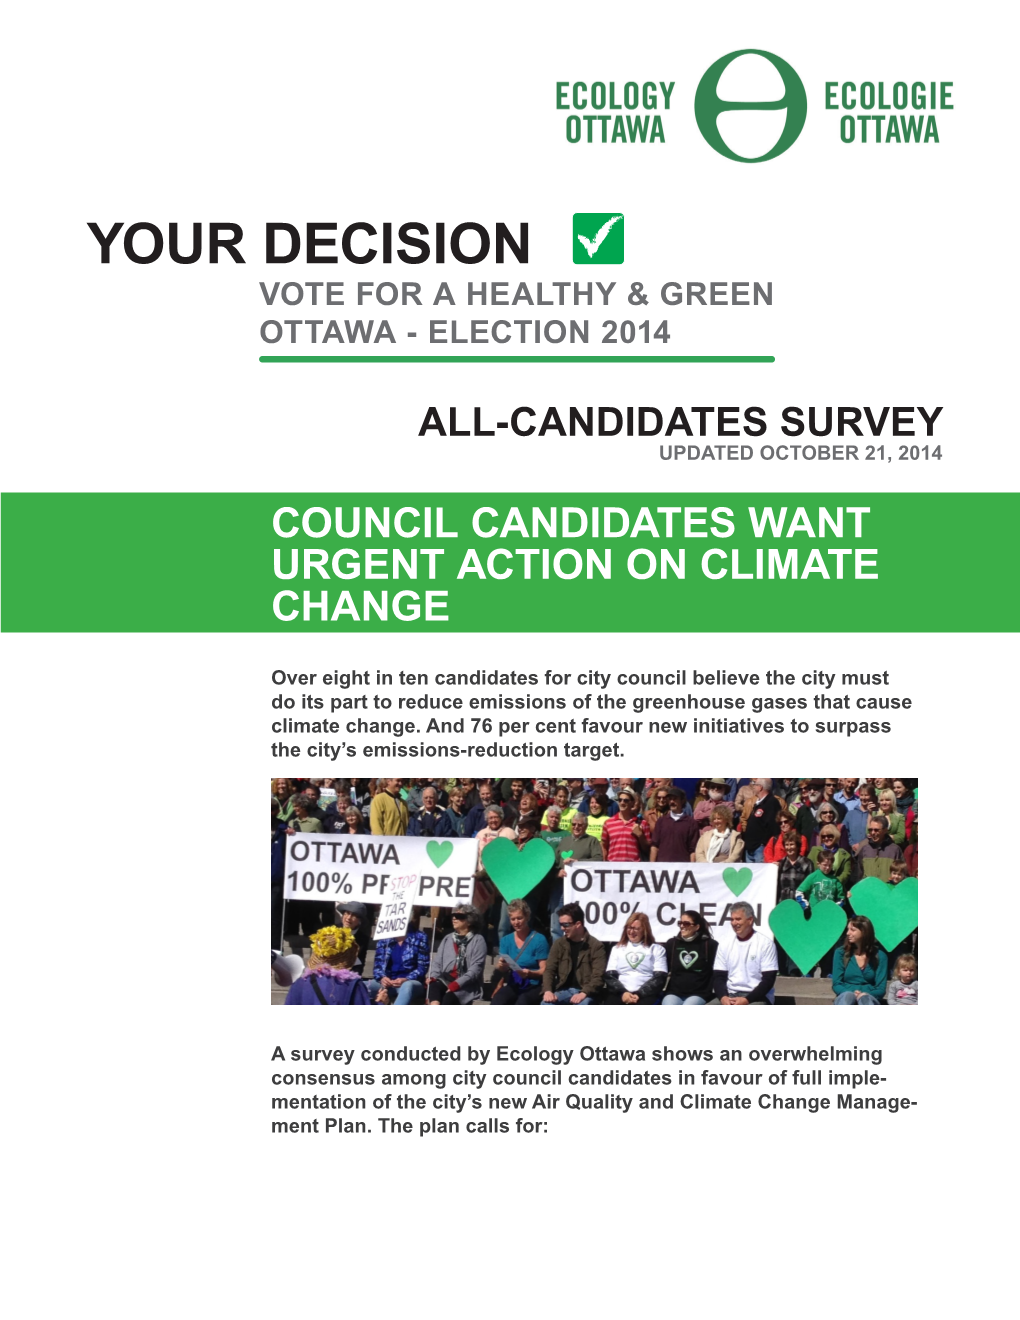 Your Decision Vote for a Healthy & Green Ottawa - Election 2014